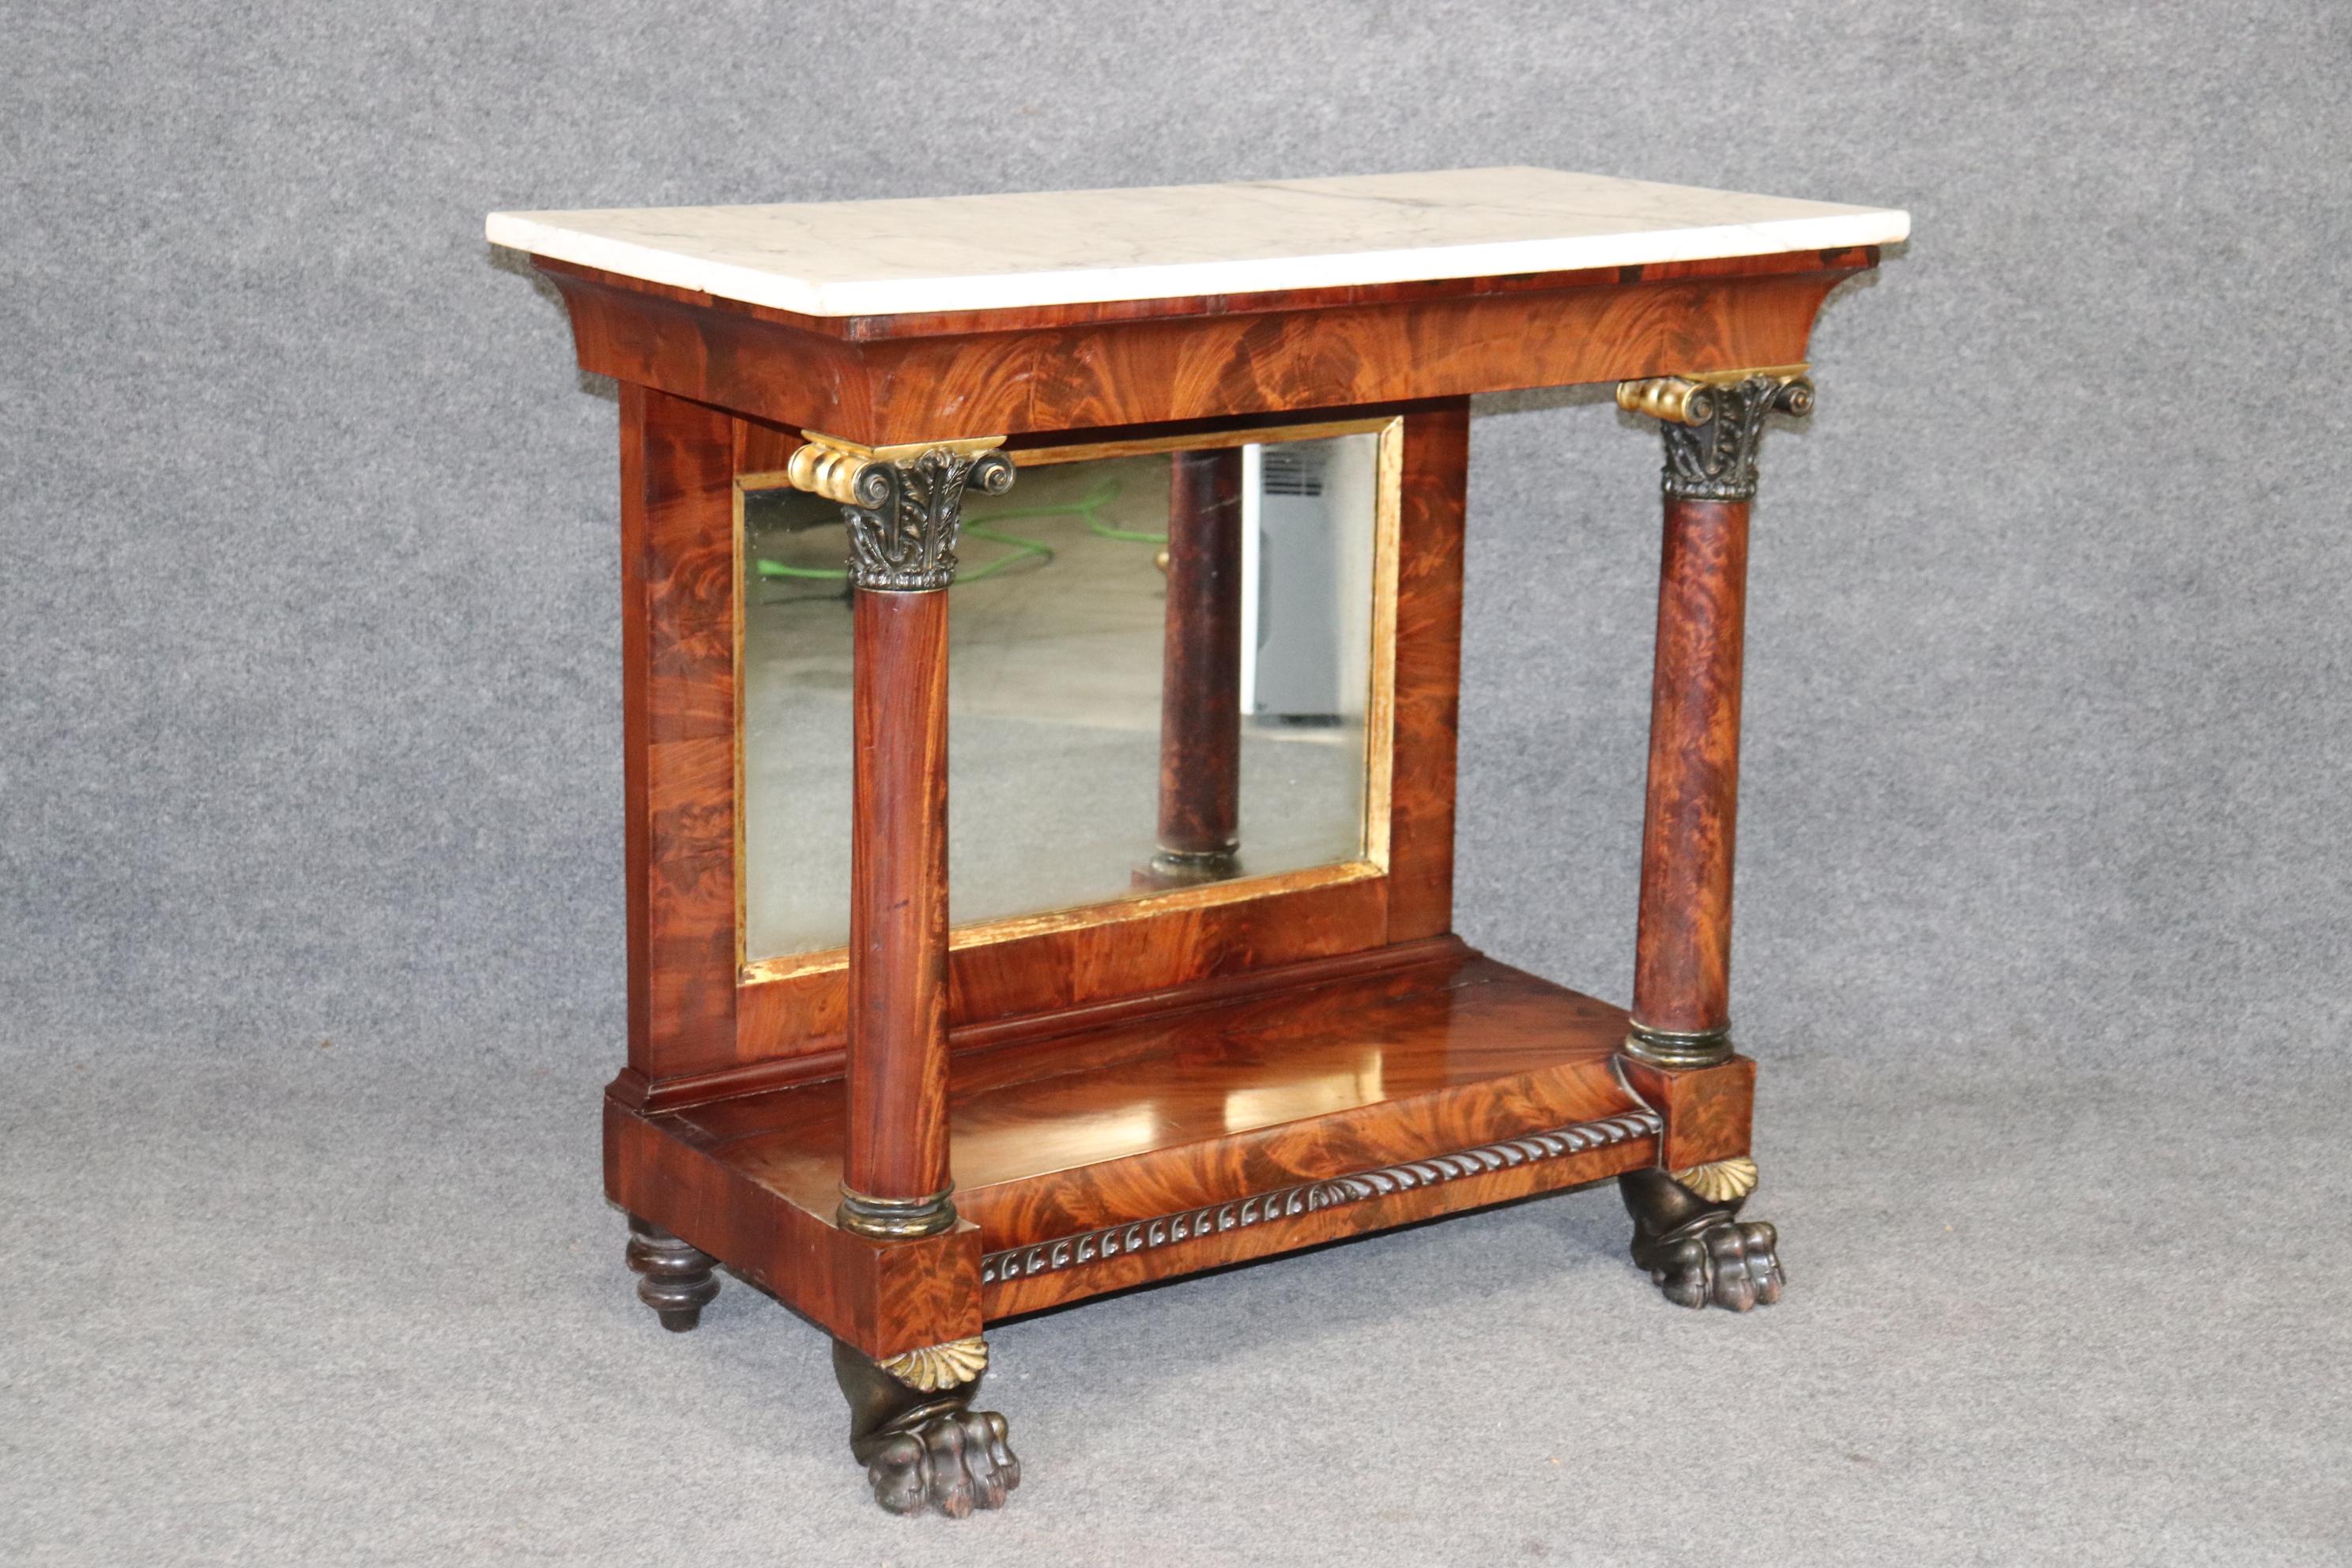 This is a gorgeous flame mahogany pier table that is either from New York City or perhaps Philadelphia. The table is fitted with beautifully carved paw feet and a nice original marble top. The table is from teh 1830-1840s era. The table will have